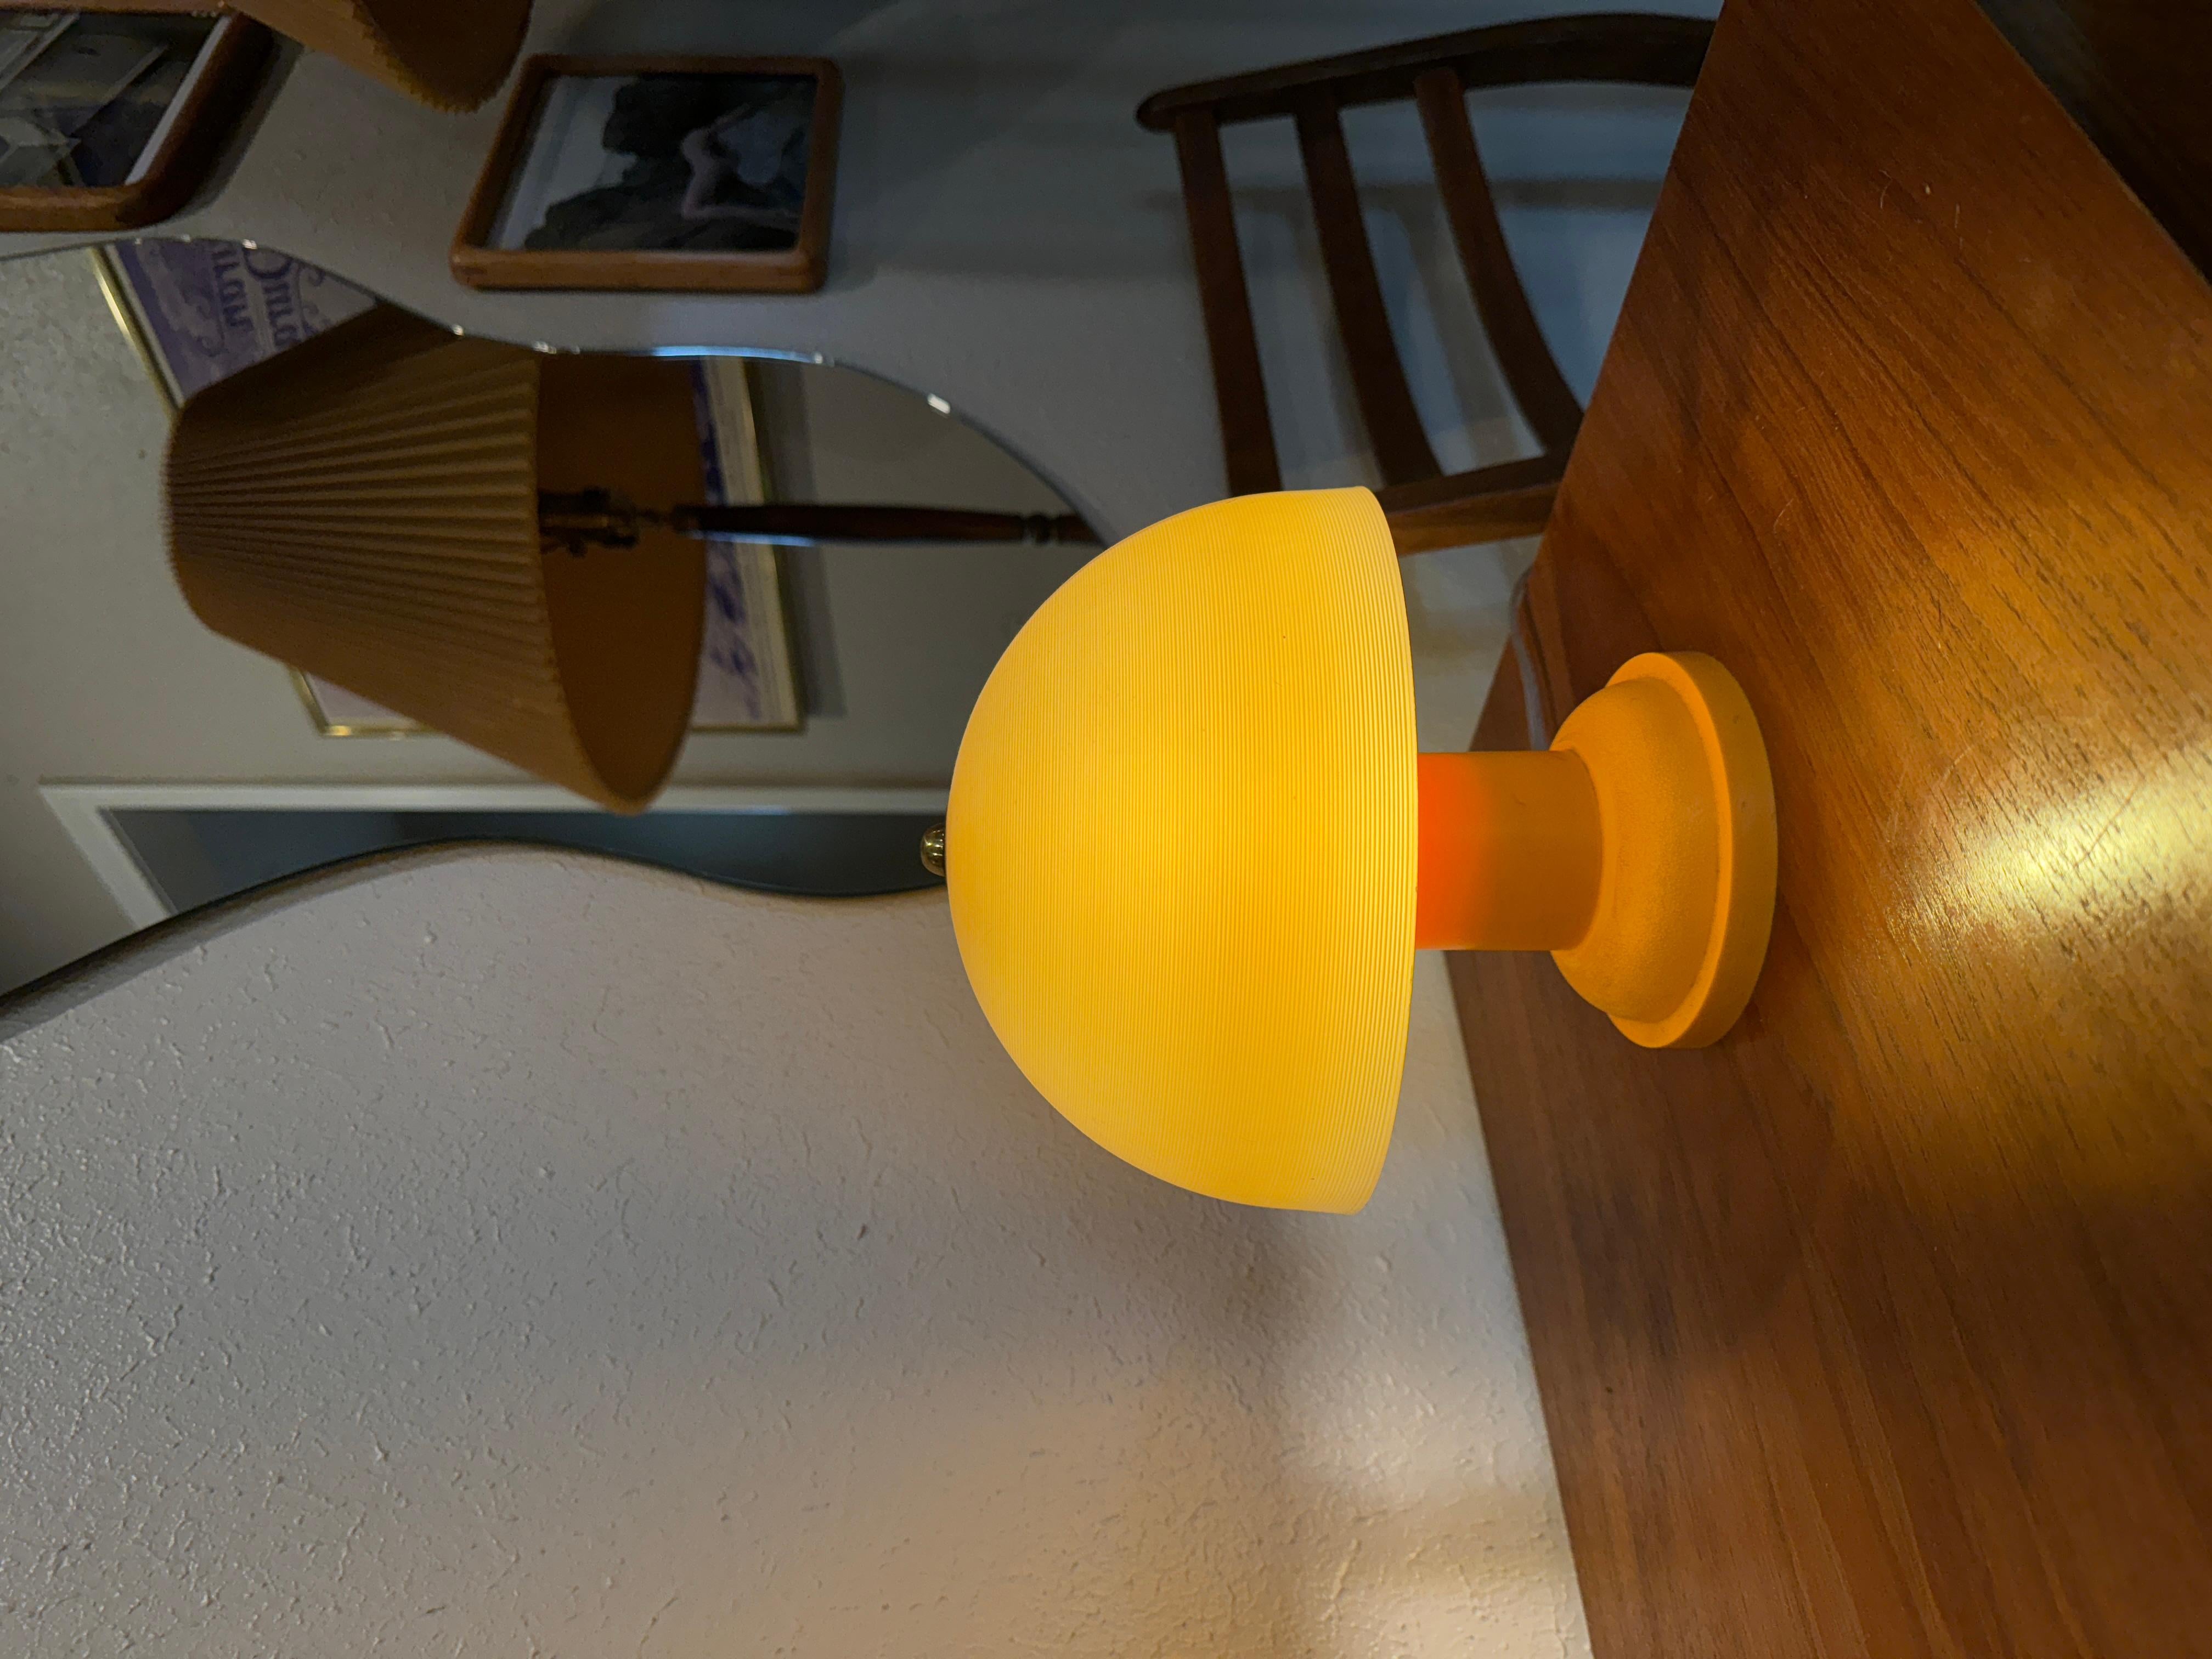 Small vintage orange mushroom lamp. 
Made of plastic.
Rewired and works perfectly. 
9” x 9”